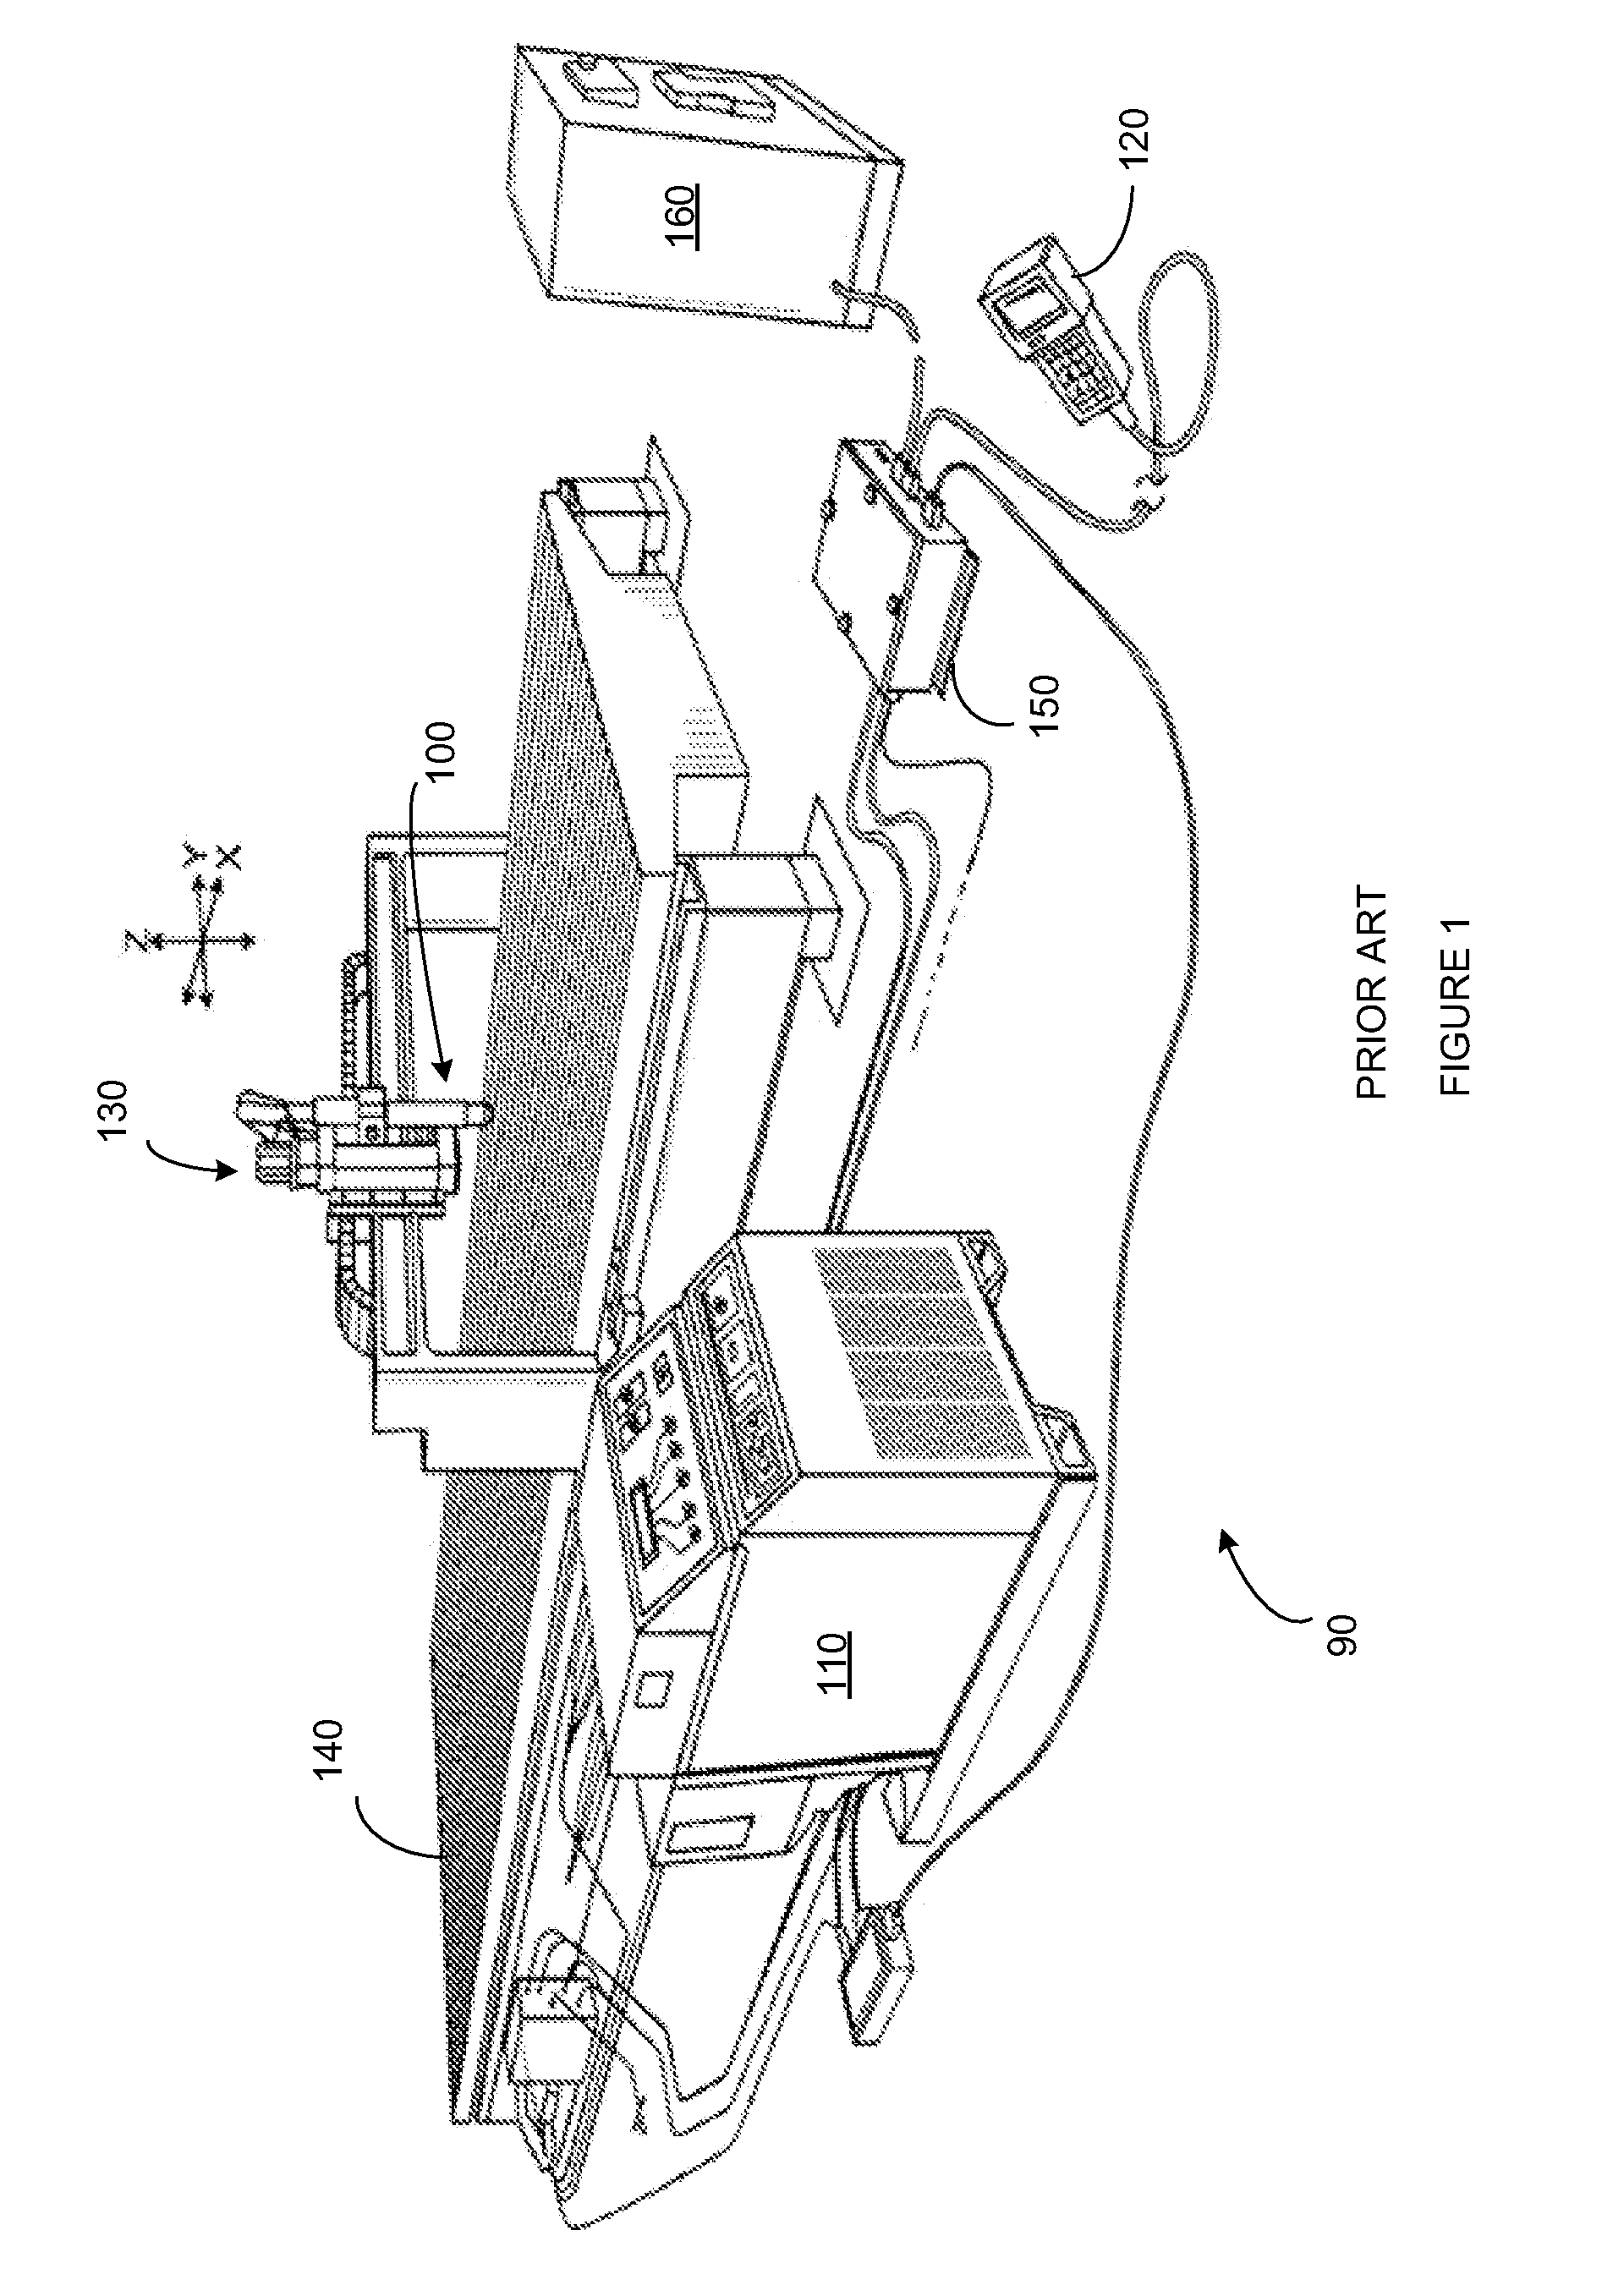 Method and Apparatus for Operating an Automated High Temperature Thermal Cutting System